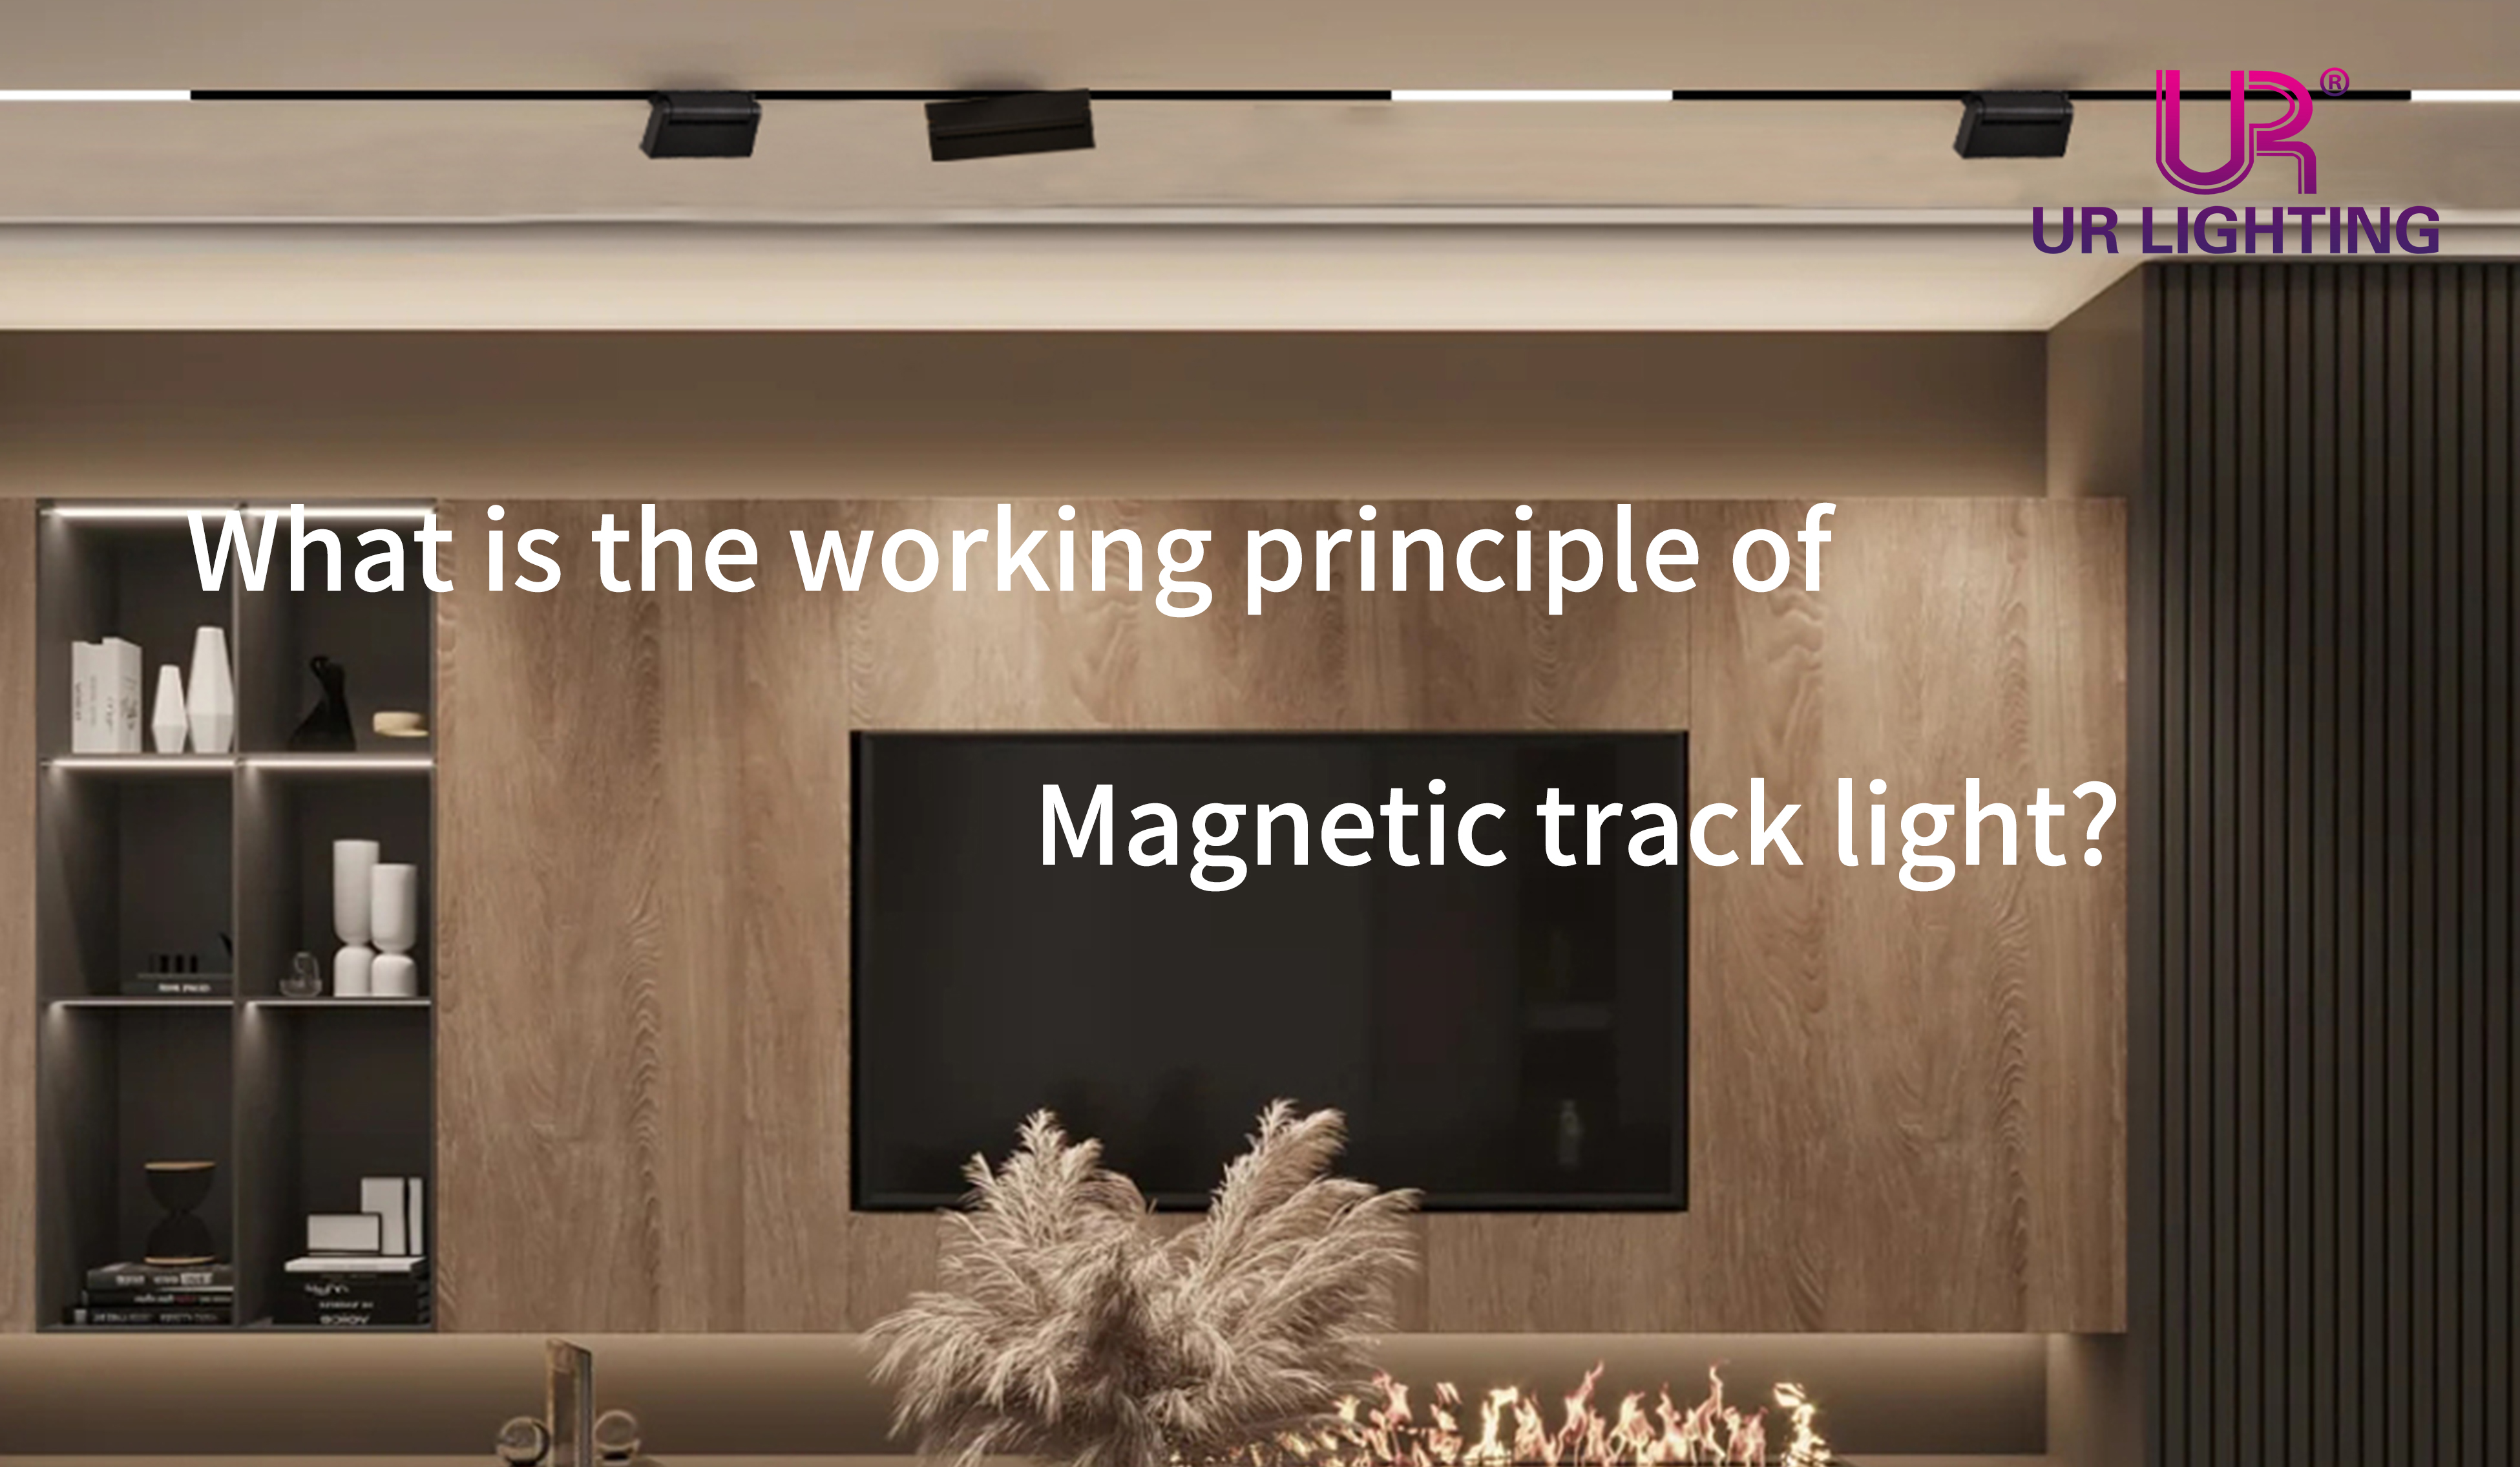 What is the working principle of Magnetic track light?